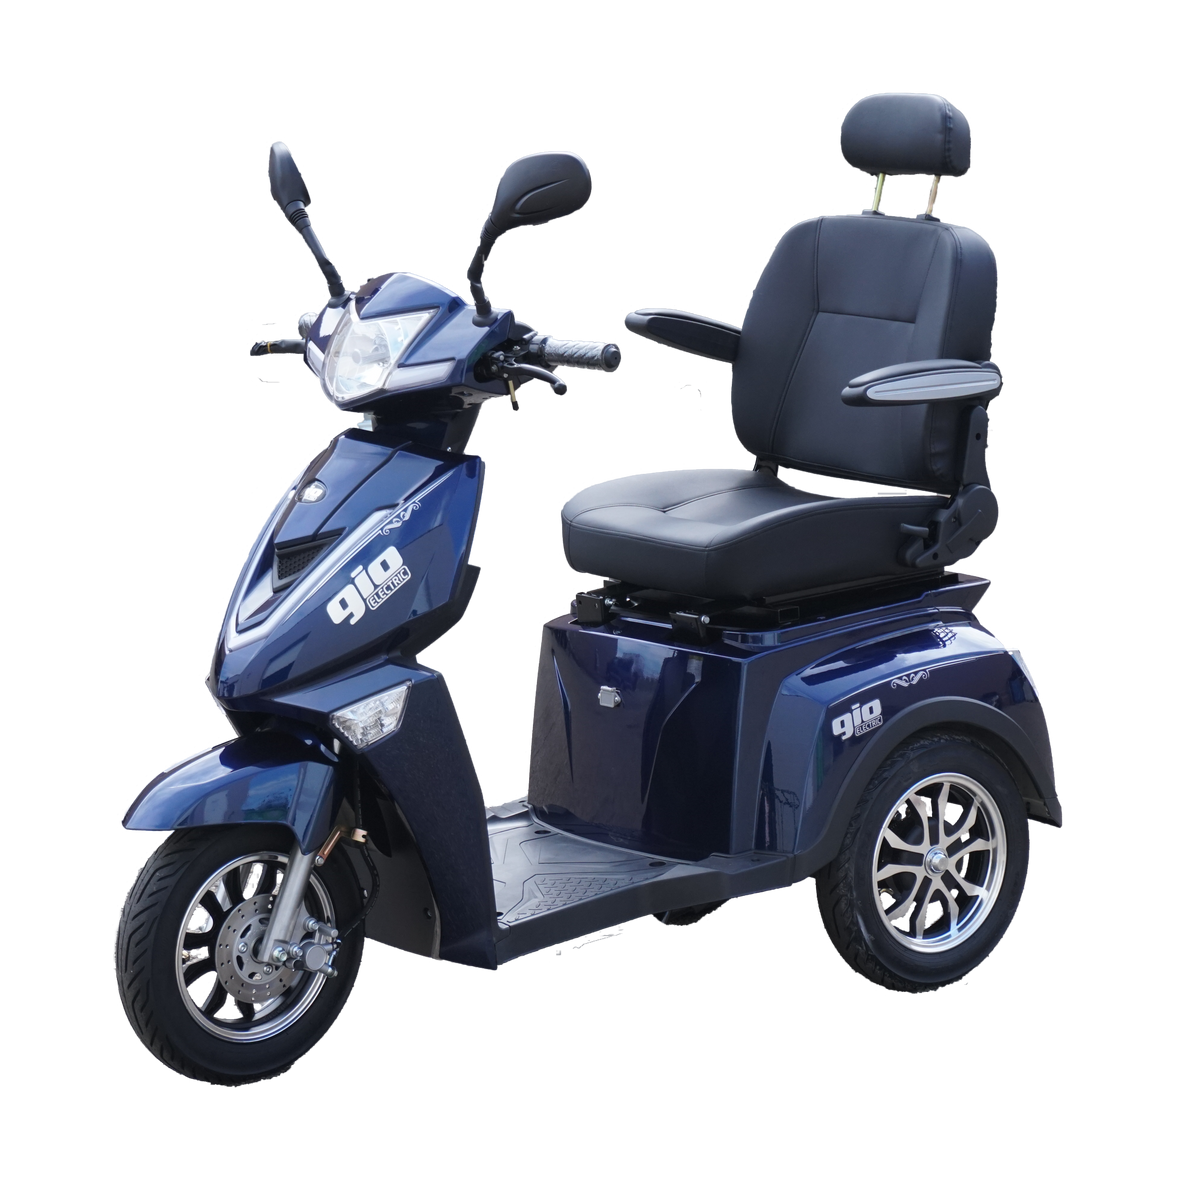 Best deals on Electric Mobility Scooters in Edmonton Alberta Canada. We have 3 or 4 Wheel Mobility Scooters with up to 2 people that can ride. Affordable prices mobility scooters from 500W to 1000W Motors. Street Legal No License Required. Forward and Reverse. Best travel mobility scooter. Basket & backup camera. 